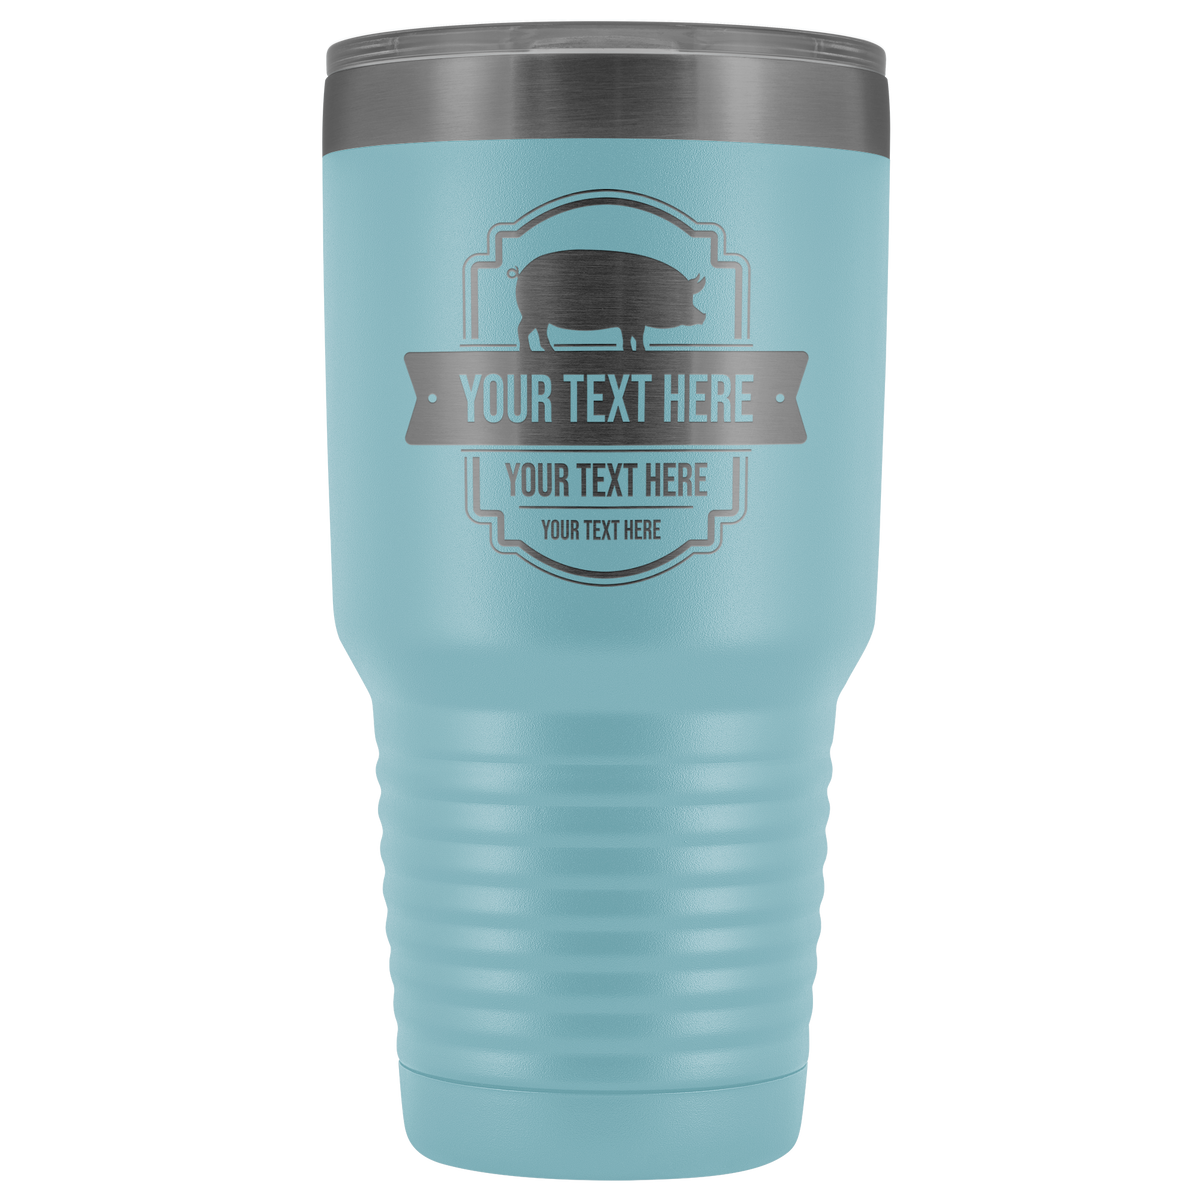 Pig Farm Your Text Here 30oz Tumbler Free Shipping